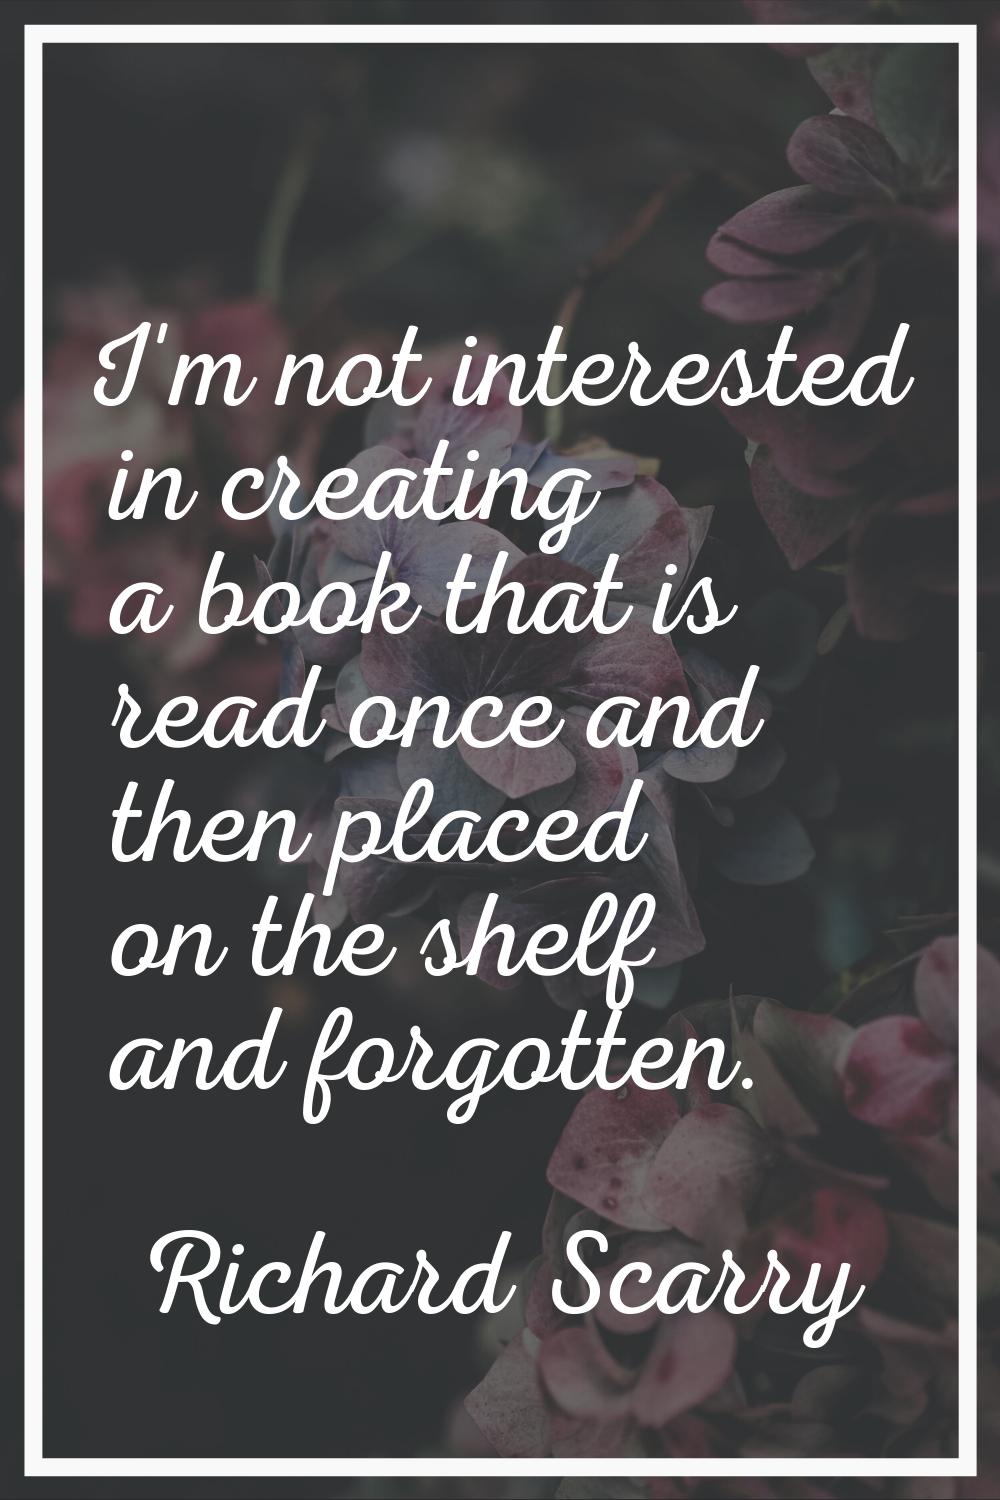 I'm not interested in creating a book that is read once and then placed on the shelf and forgotten.